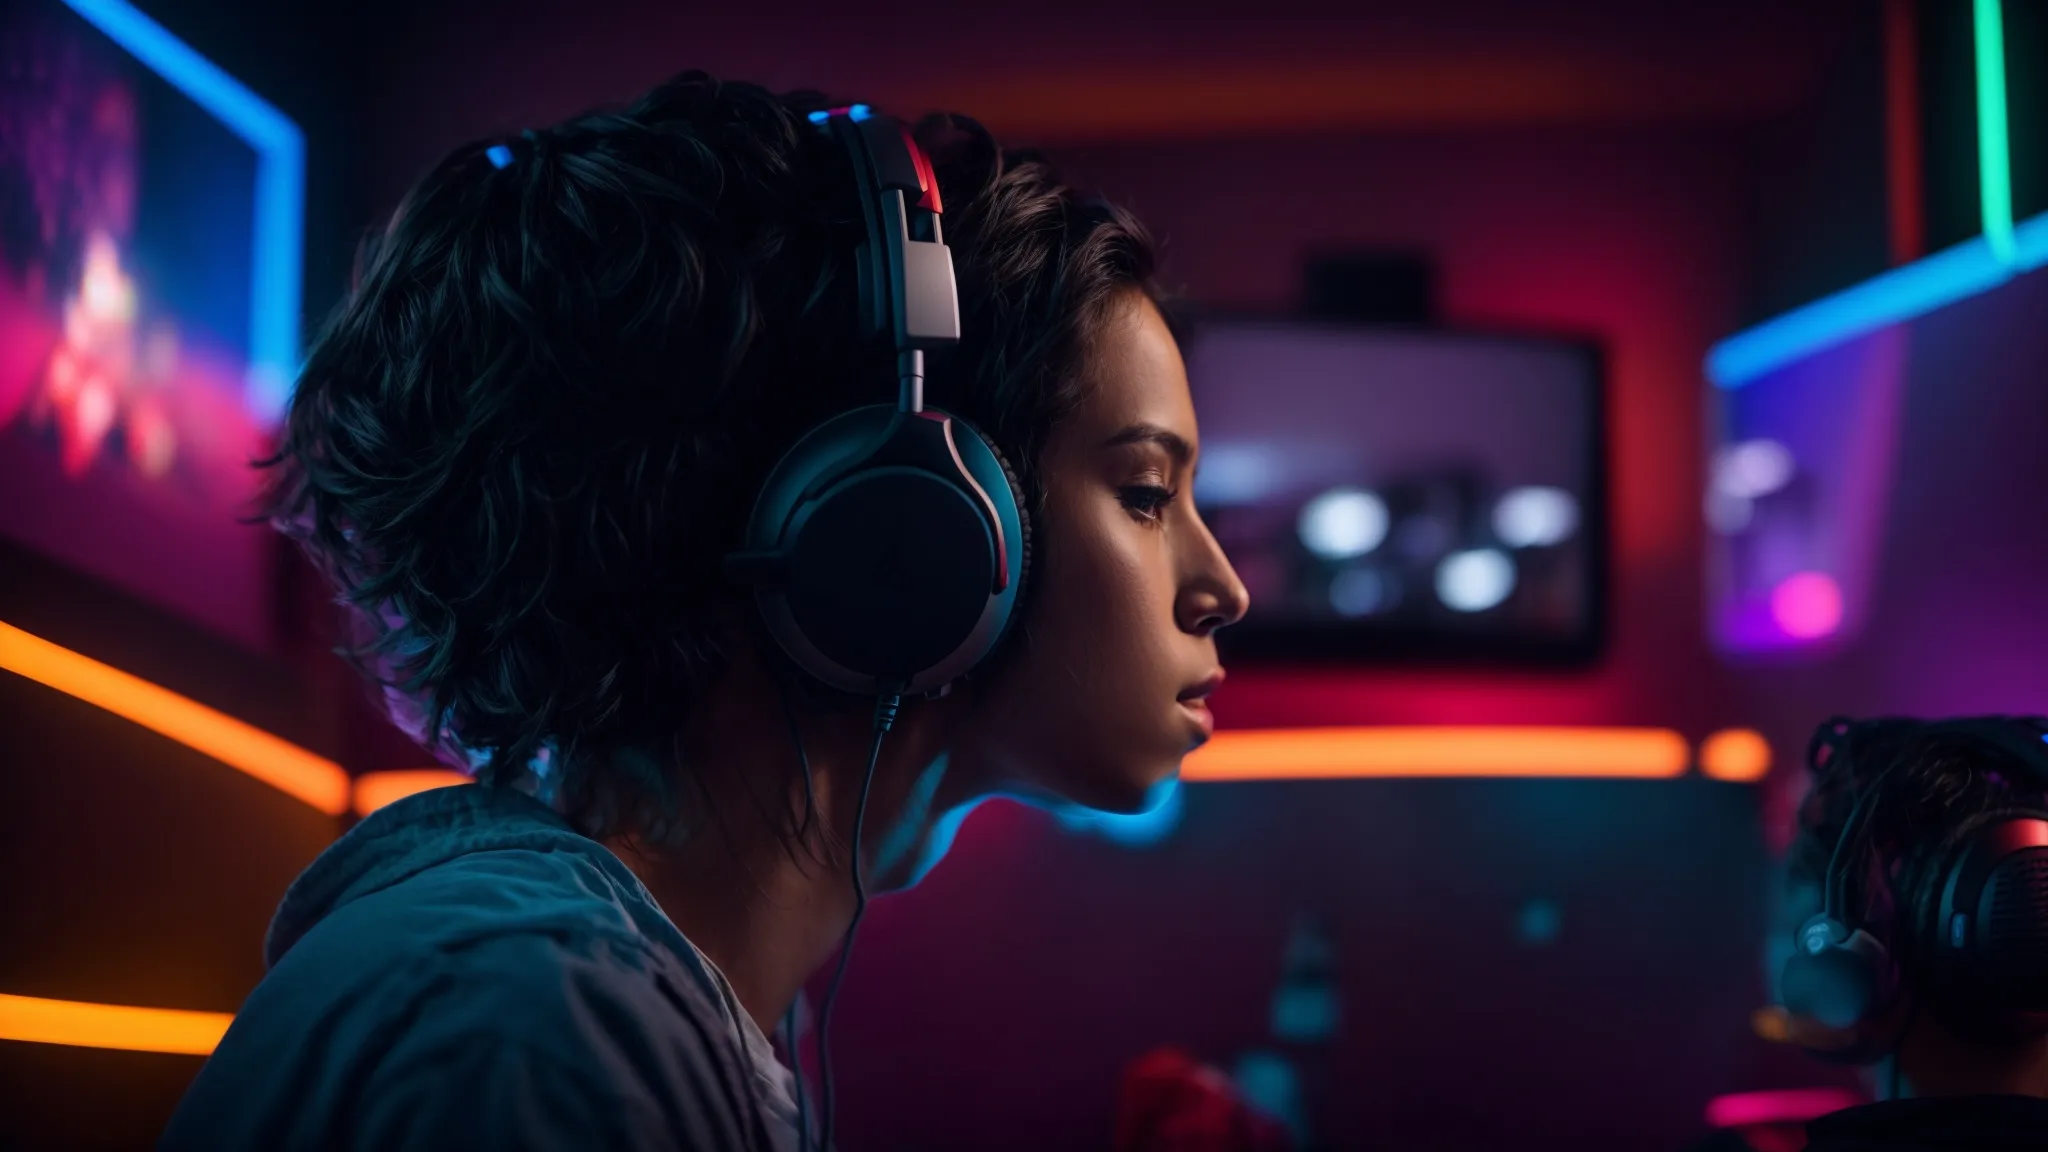 a streamer sits in a room lit by colorful led lights, wearing the audio-technica ath-m50x sts headset and focusing intently on a vibrant game scene on the monitor ahead.